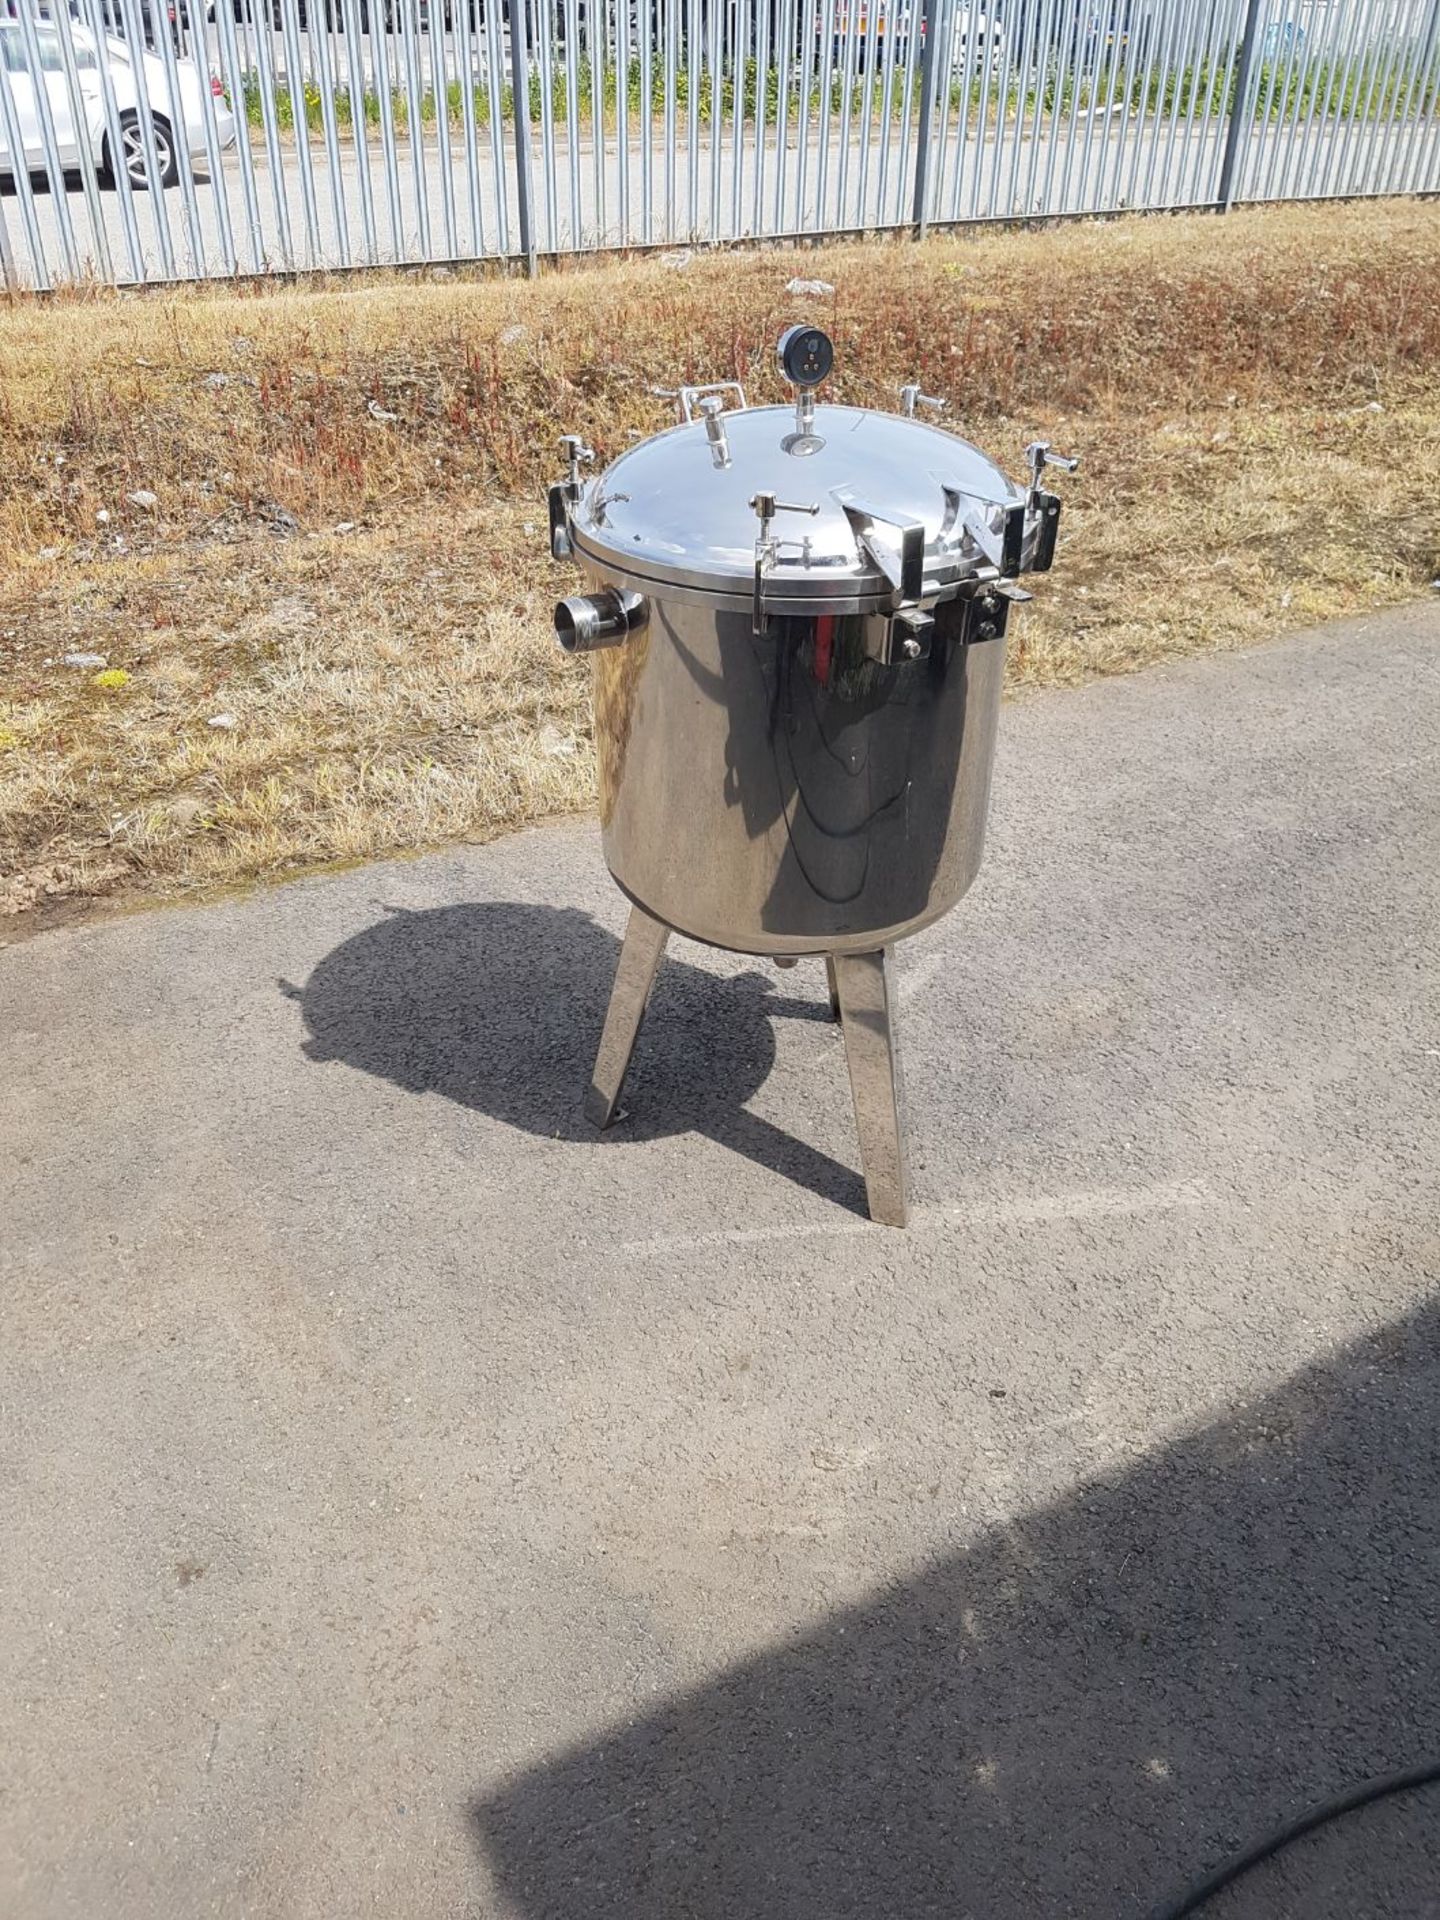 1 x brand new resim impregnation stainless steel tank vacuum tank with basket filter support - Image 7 of 10